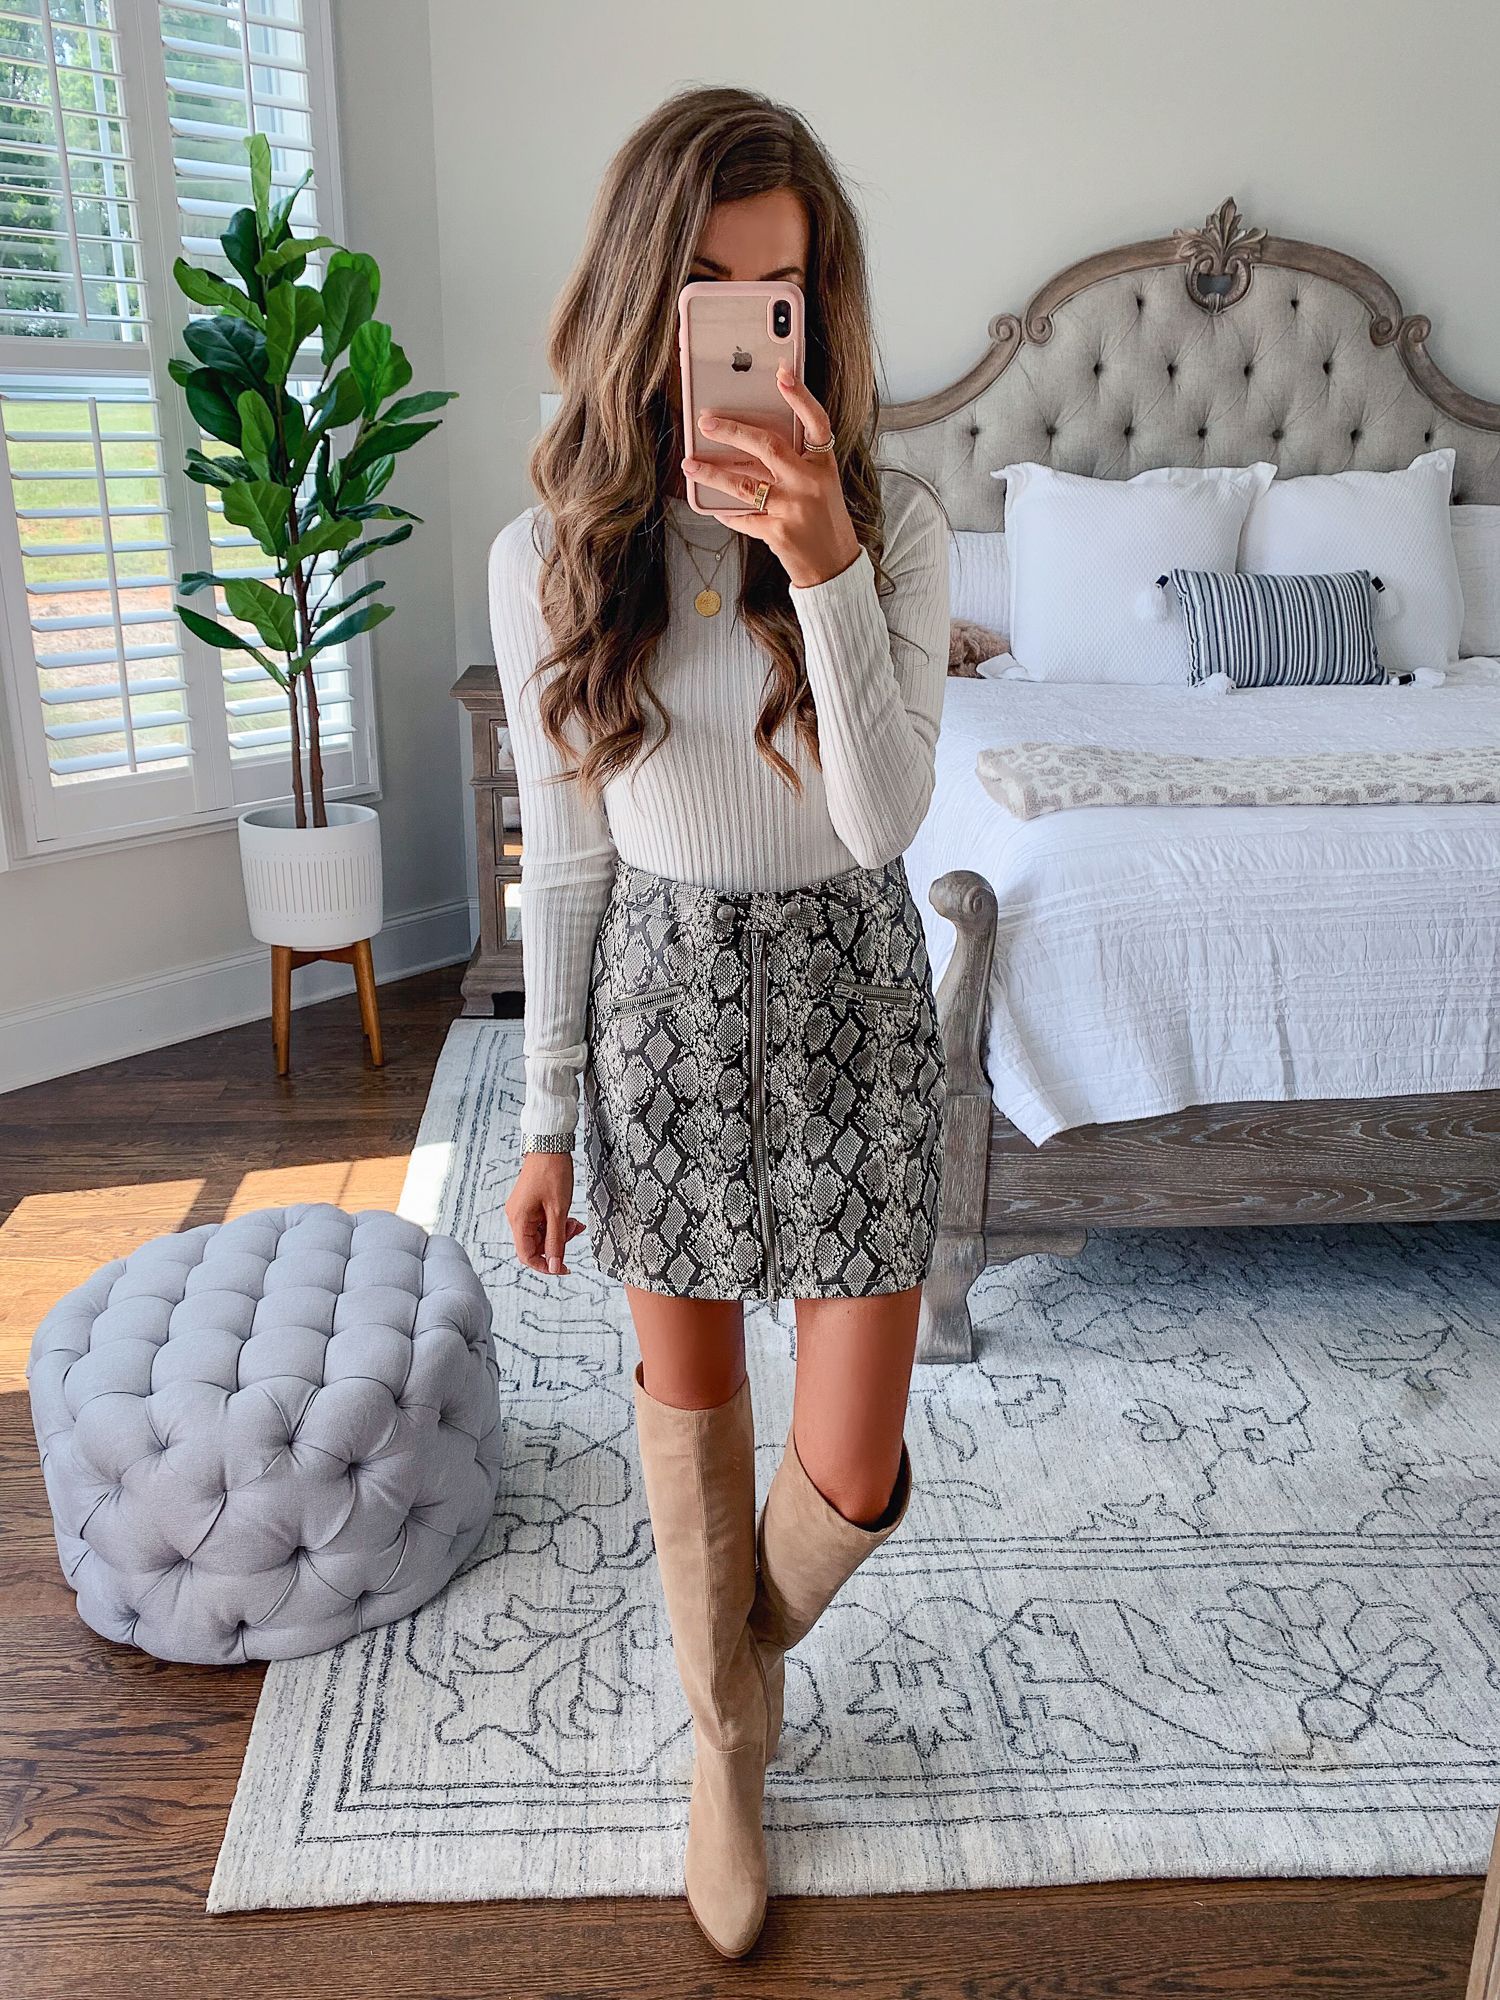 Nordstrom Anniversary Sale Guide 2019 + GIVEAWAY - Nordstrom Anniversary Sale Guide 2019 + GIVEAWAY -   18 southern style Outfits ideas